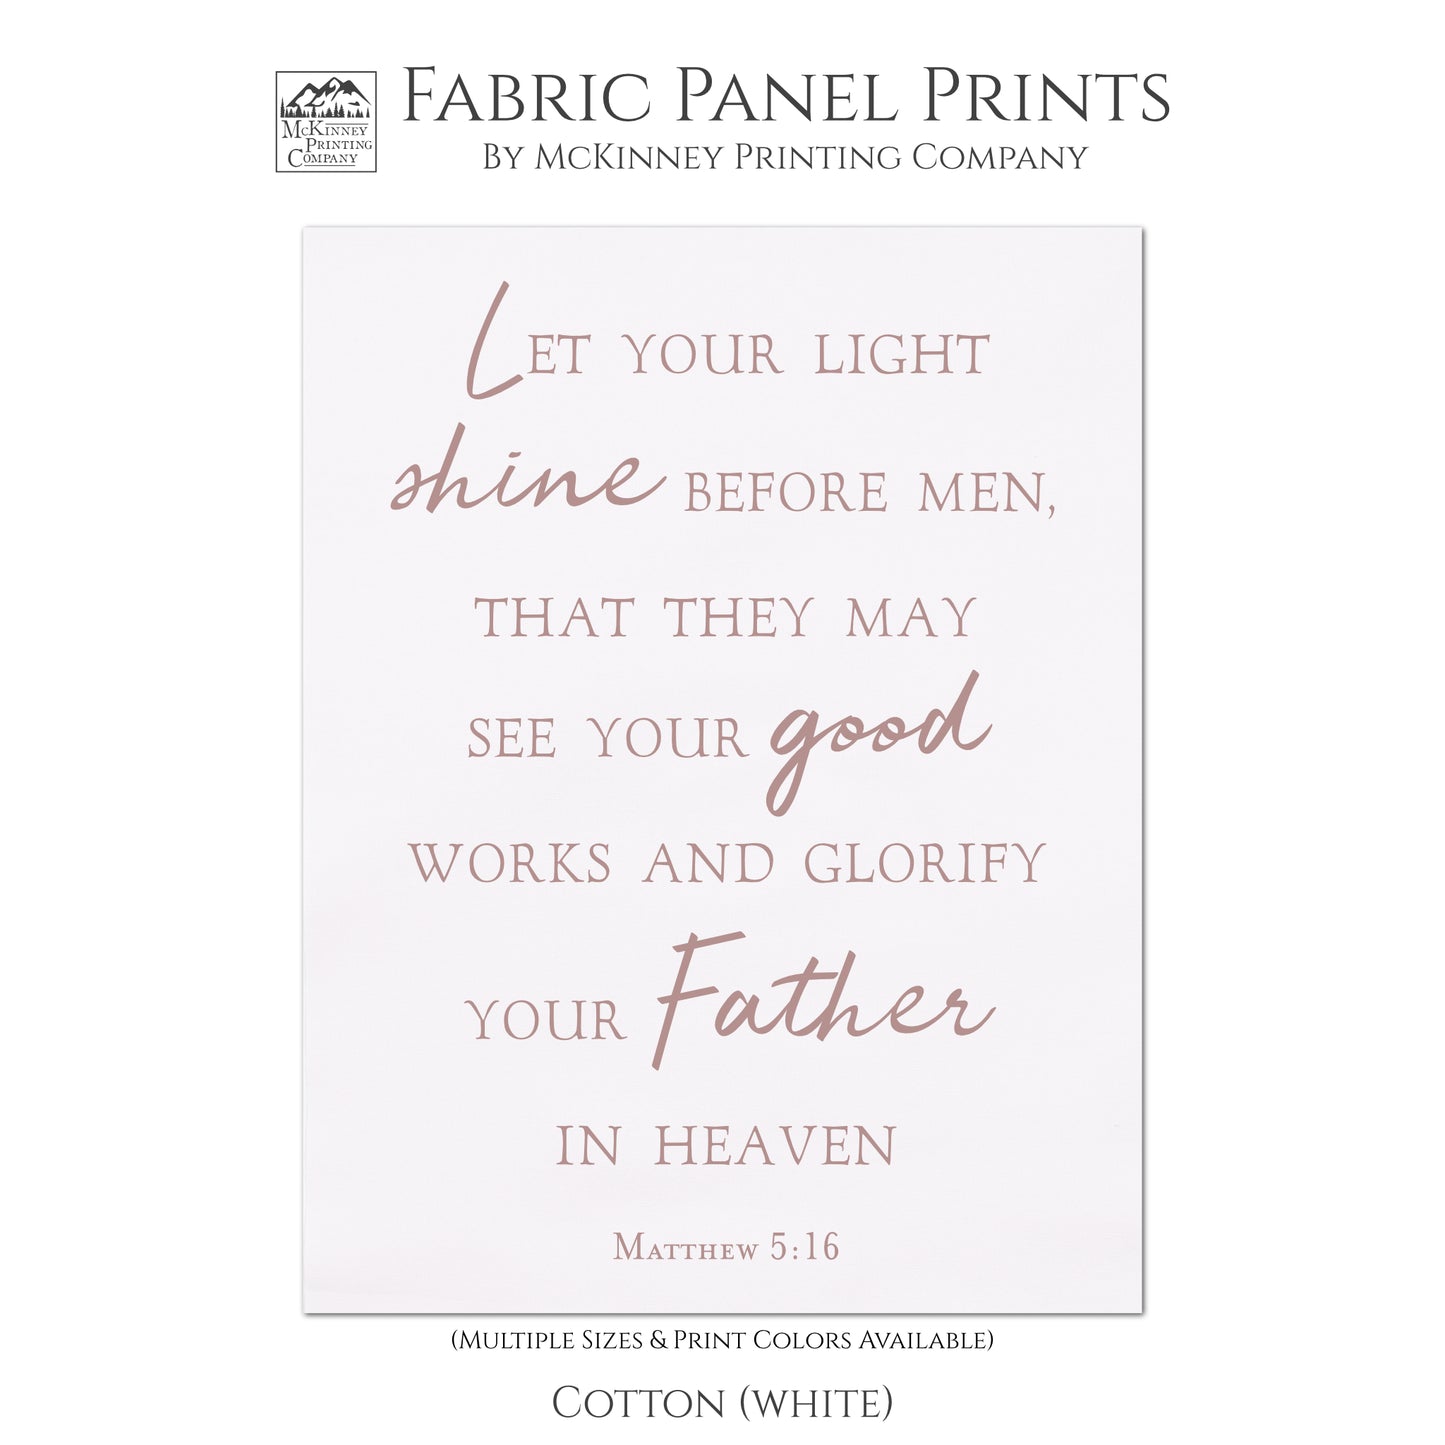 Let your light shine before men, that they may see your good works and glorify your Father in heaven. - Matthew 5 16, Fabric Panel Print - Cotton, White